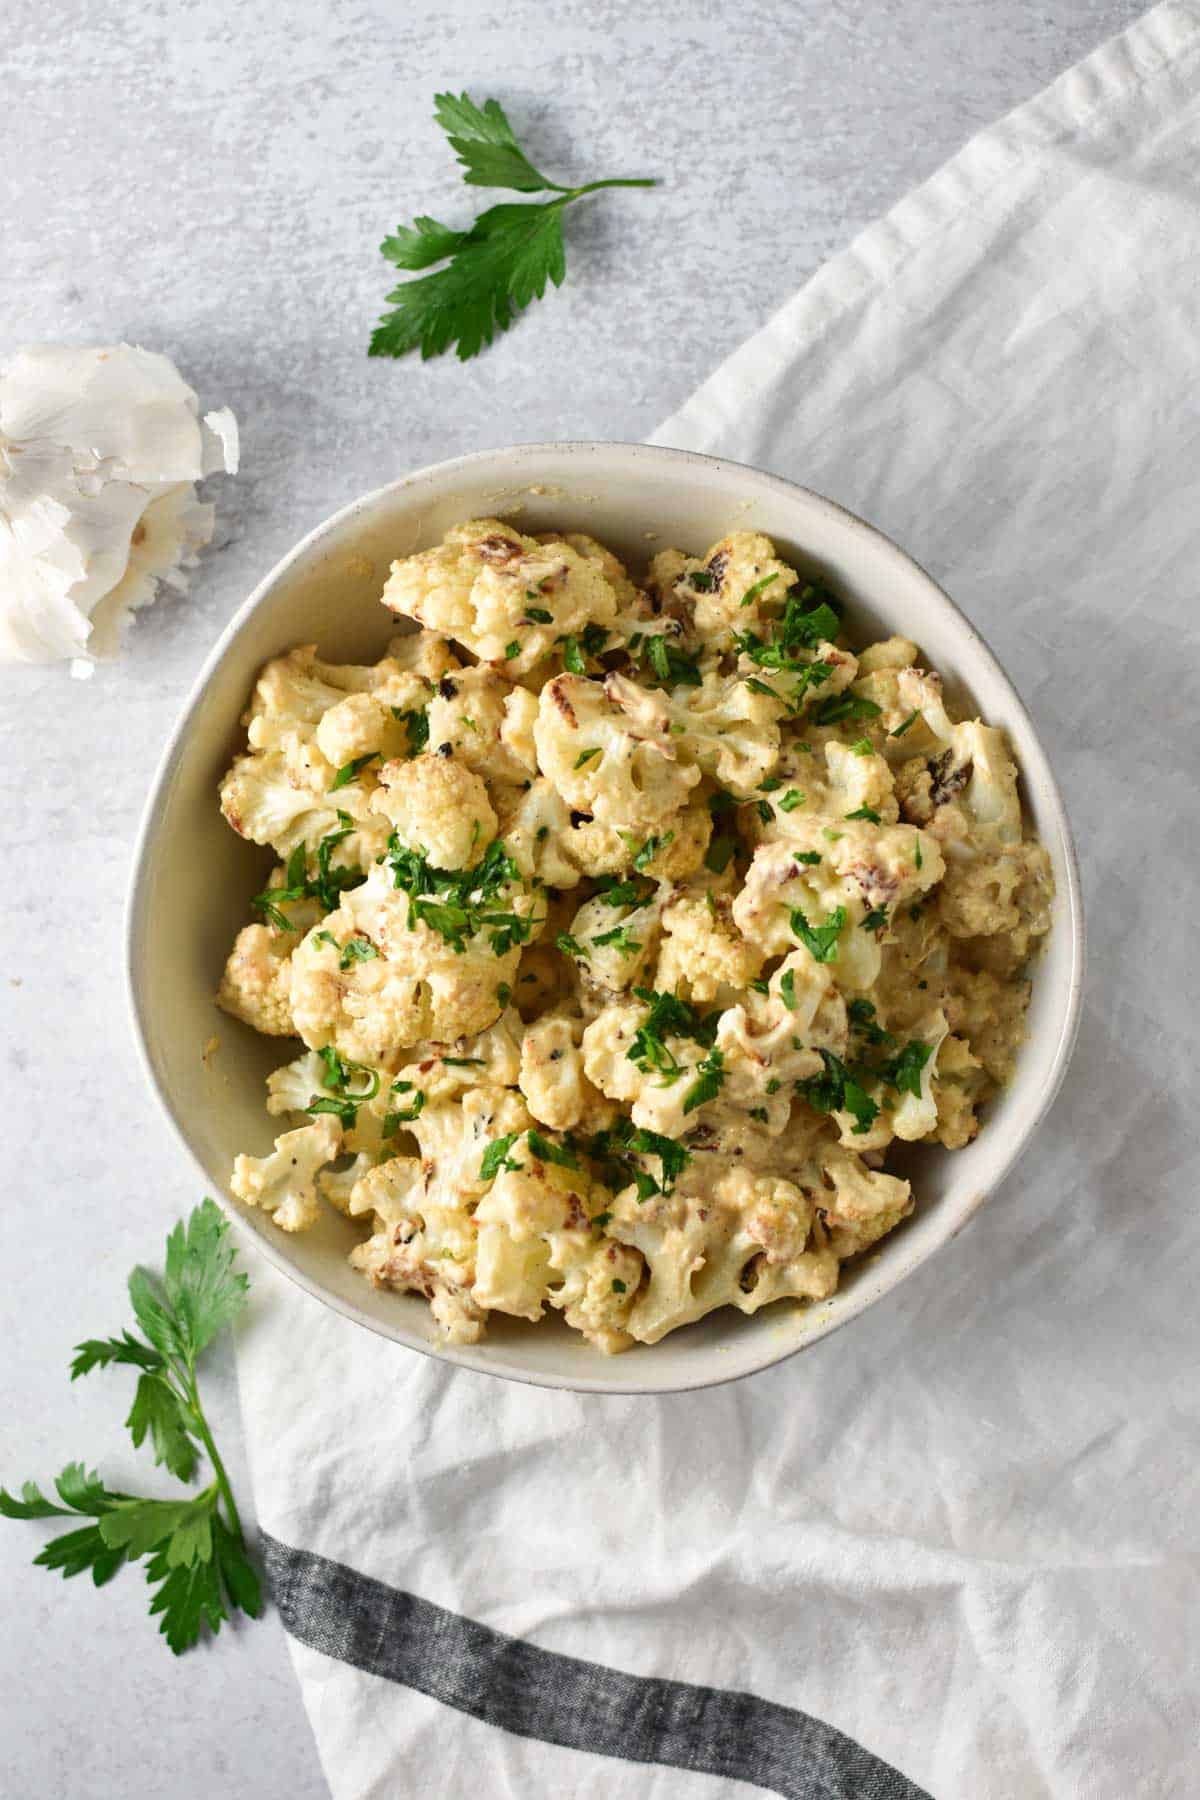 Creamy roasted cauliflower coated in a cheese sauce topped with parsley next to a garlic clove and white napkin.